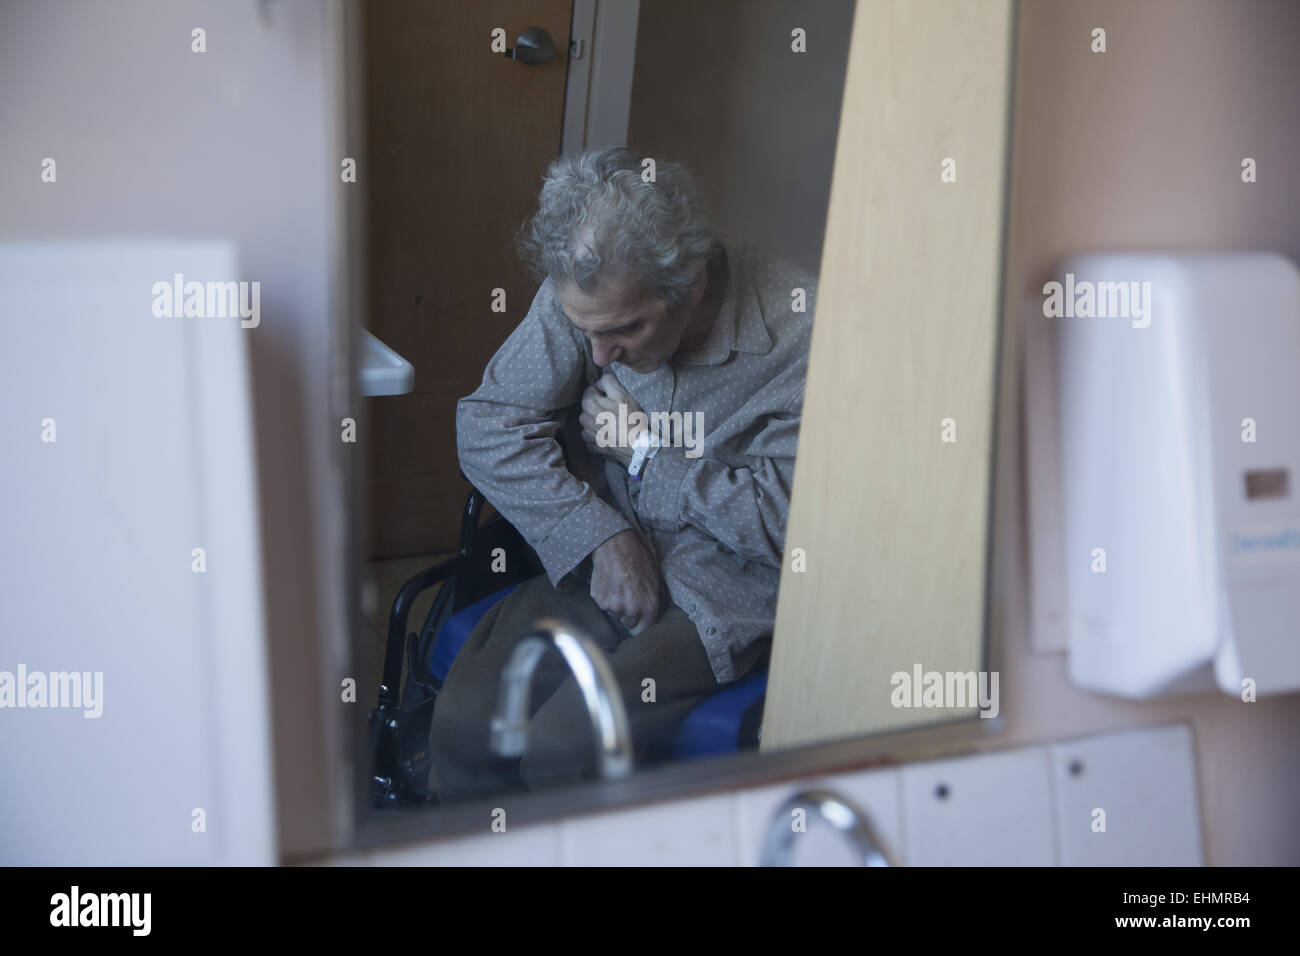 Man with vascular dementia withdrawn from the outside world for the most part. Nursing home, Brooklyn, NY. Stock Photo